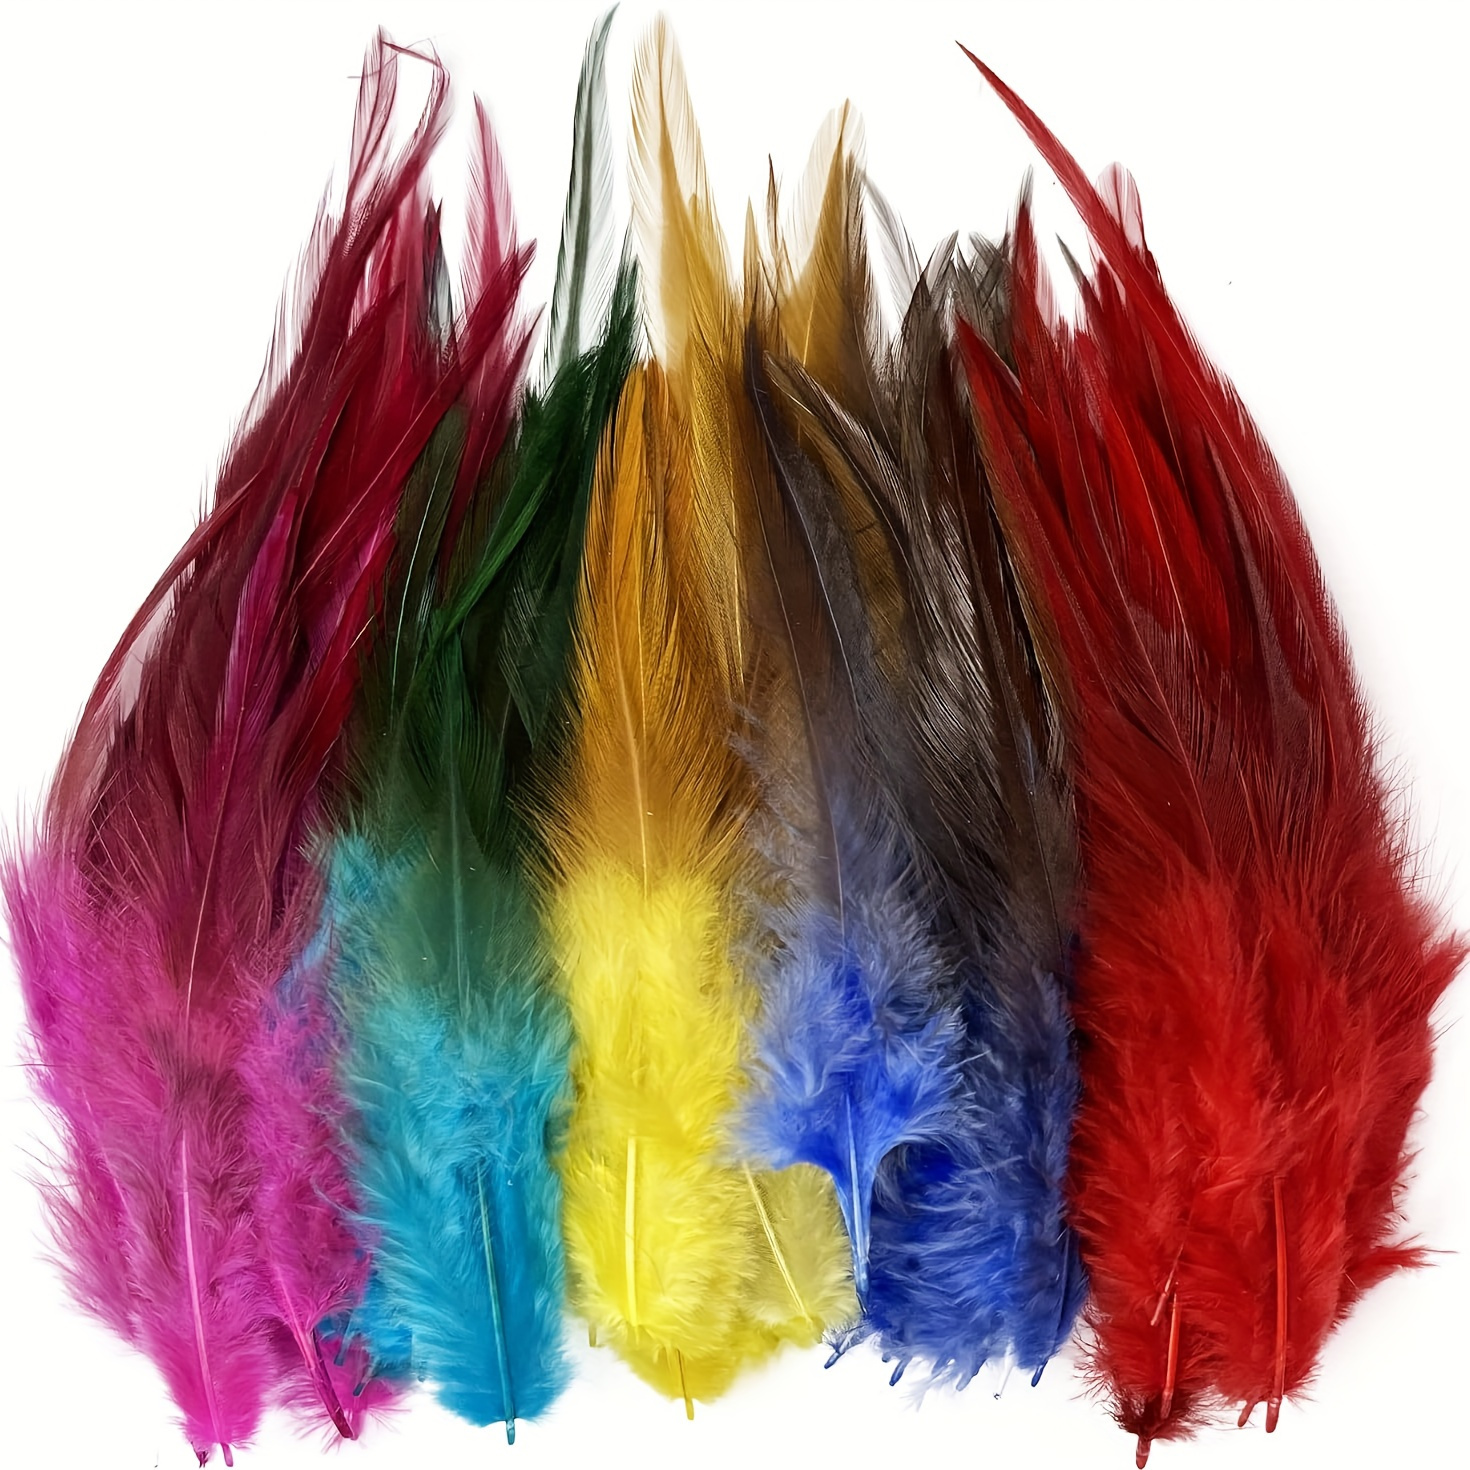 Feathers for Crafts, 100 Pieces Natural Colourful Feathers Turkey Feathers  Dyeable Color DIY Feather for Dream Catcher Crafts, Costumes DIY Wedding